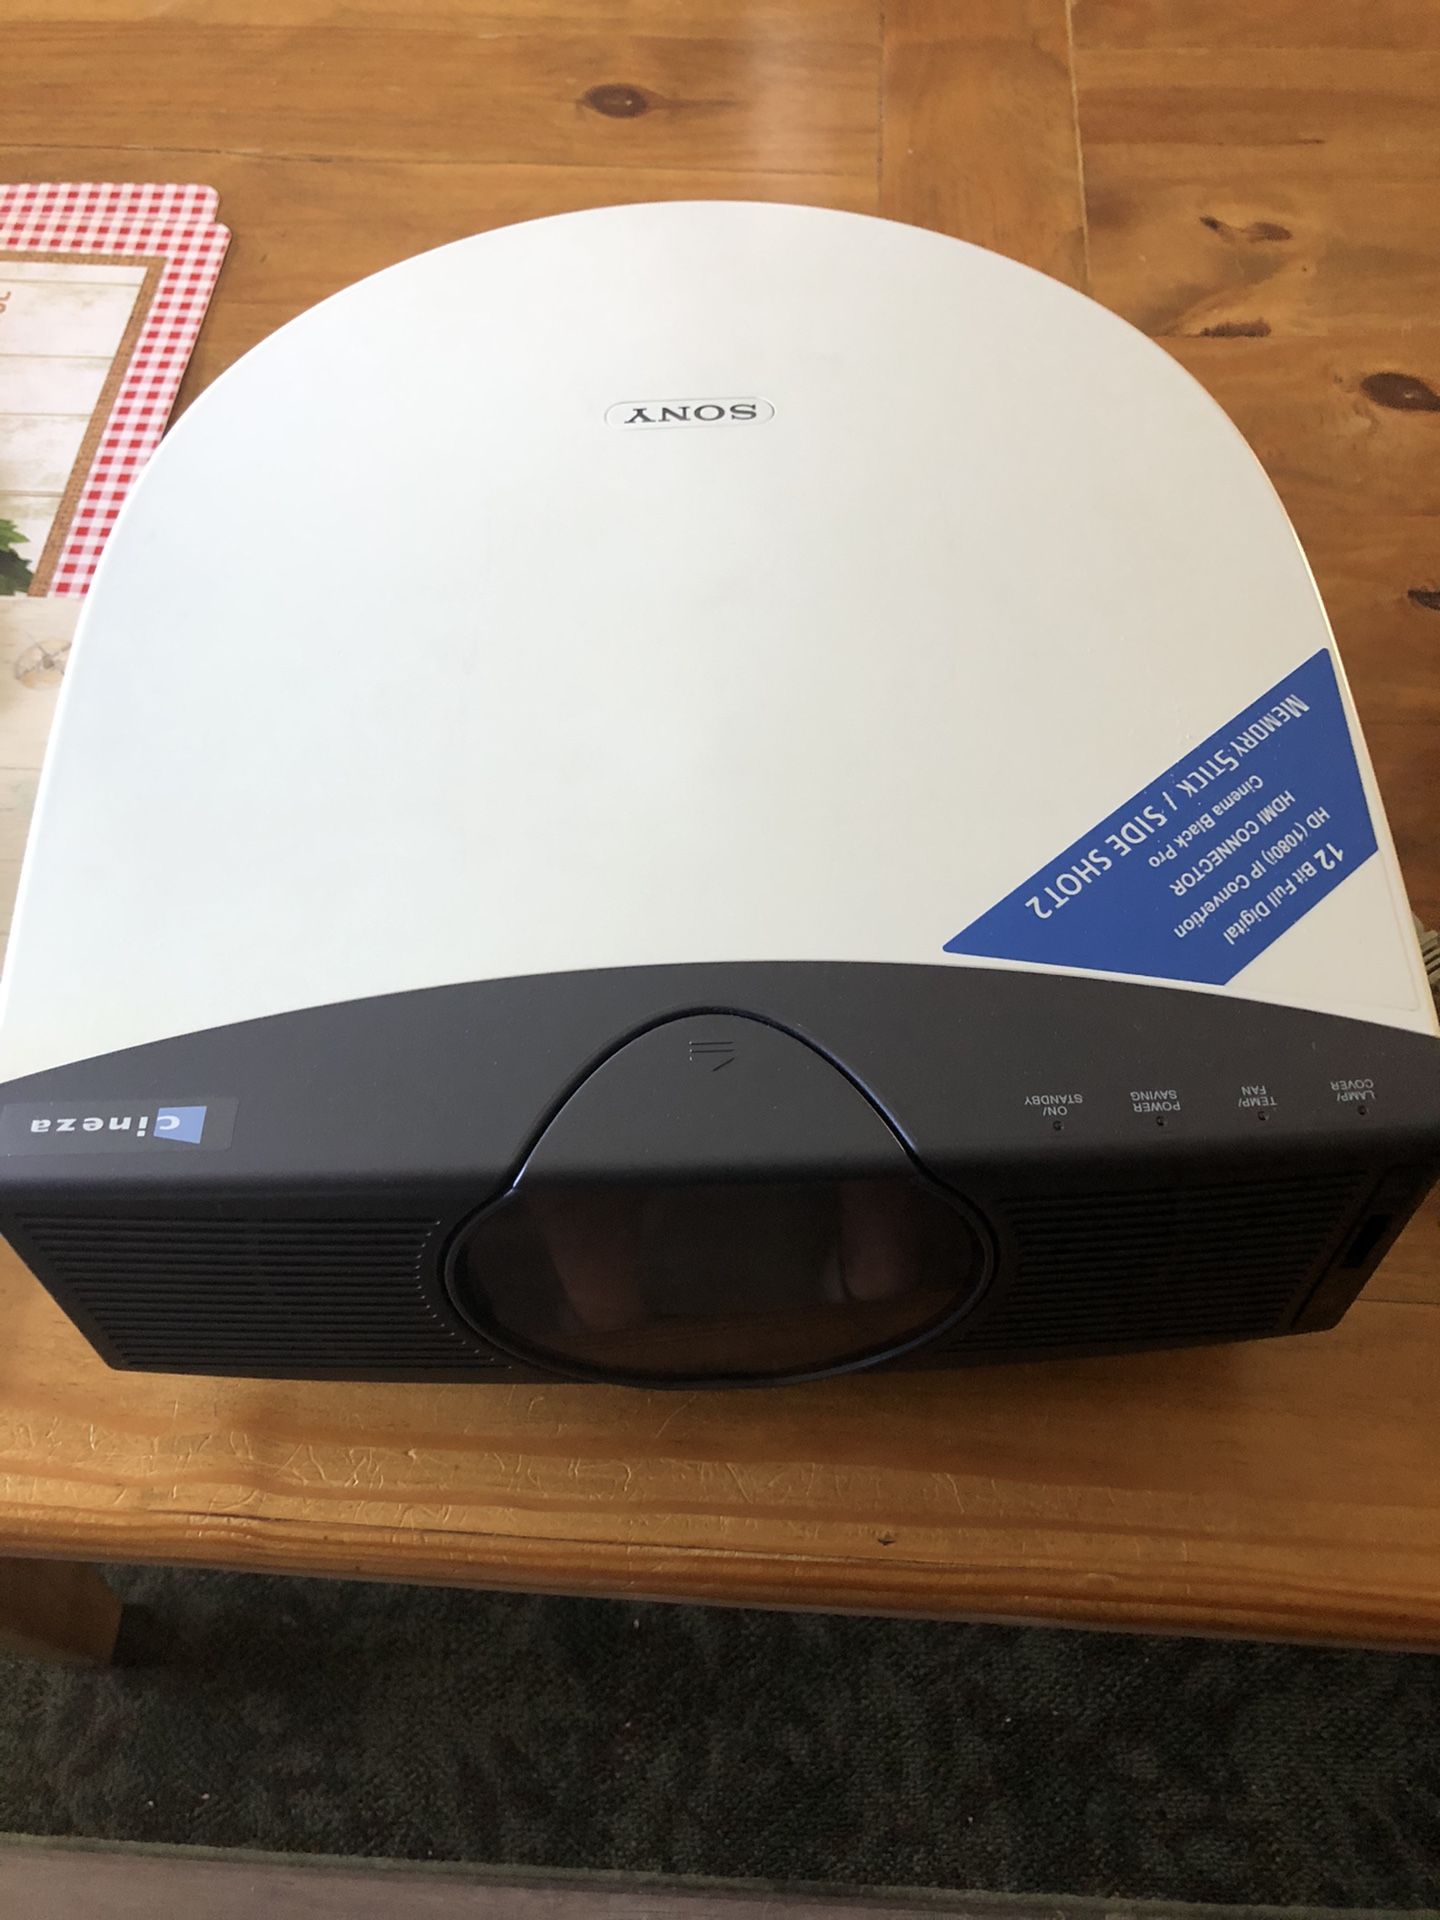 Sony video projector